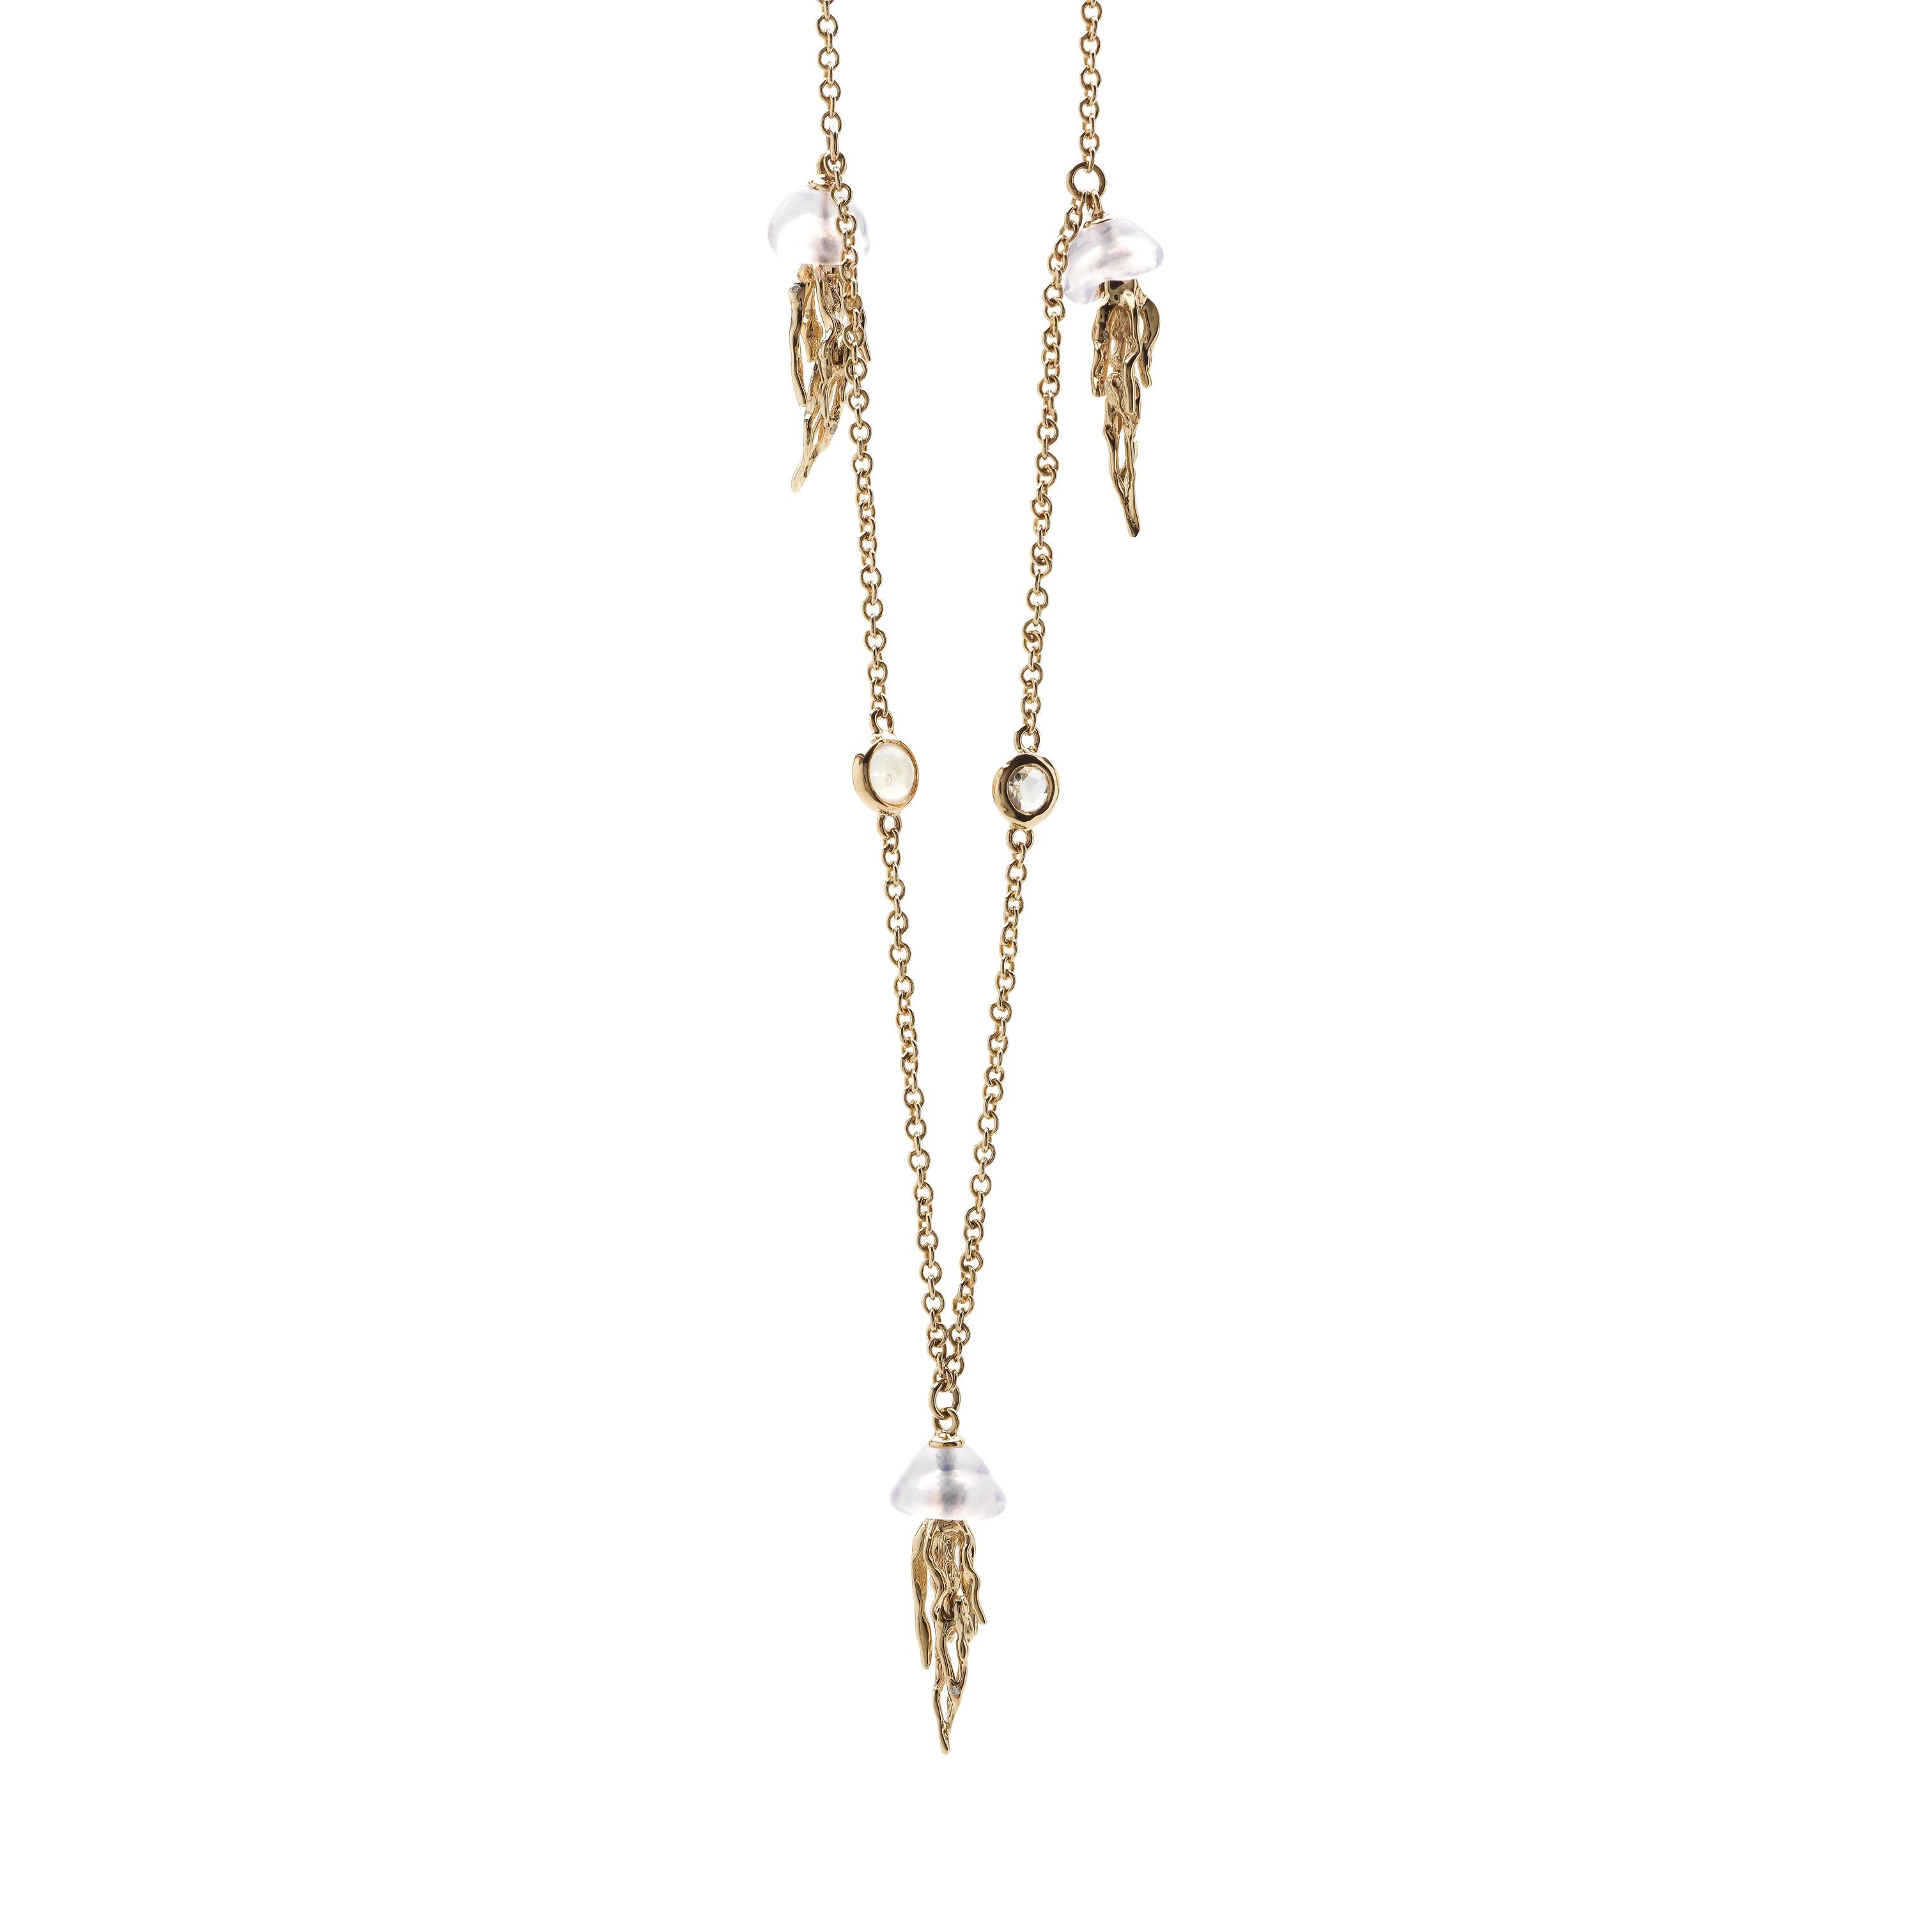 The delicate Jellyfish Necklace captures this sea creature’s graceful movements. Designed in 18k yellow gold, the necklace’s chain is set with jellyfish crafted in moonstone and 18k yellow gold along its length, with the chain embellished with